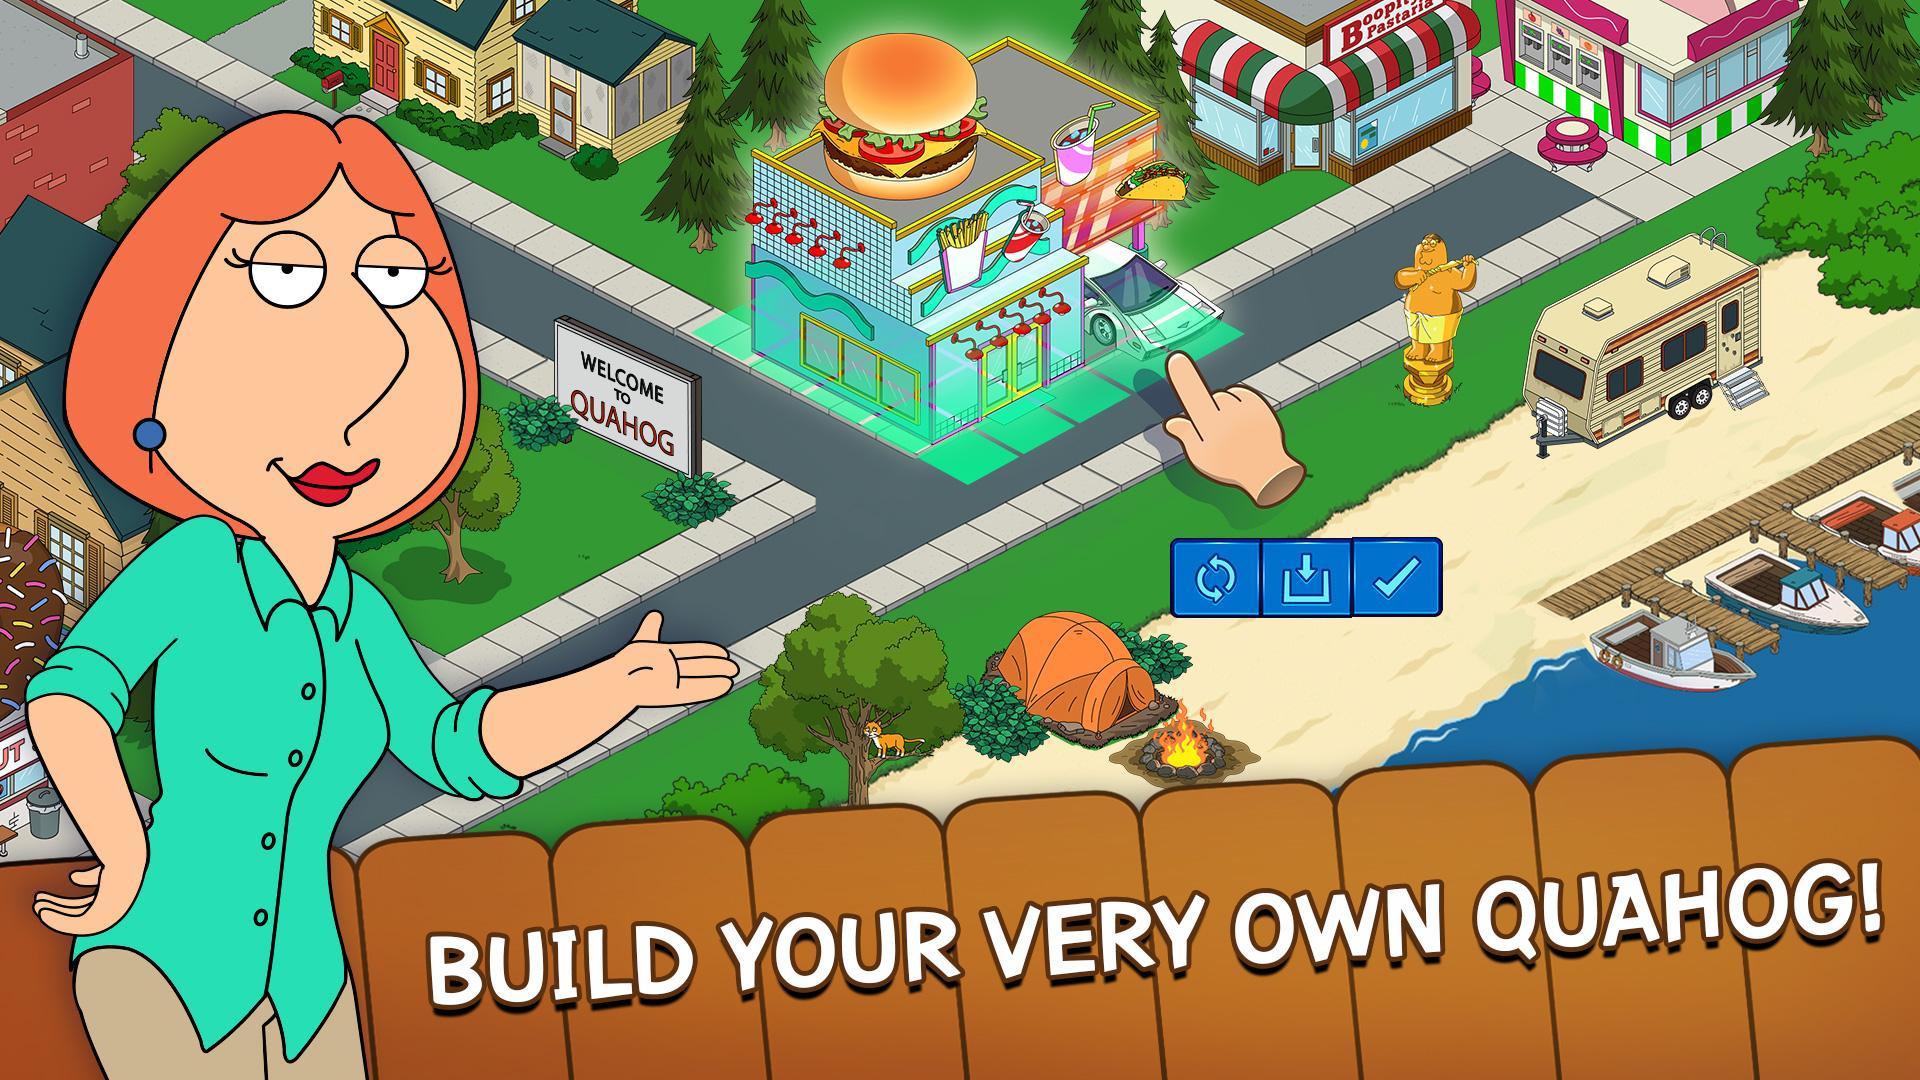 Family Guy The Quest for Stuff 3.8.1 Screenshot 3